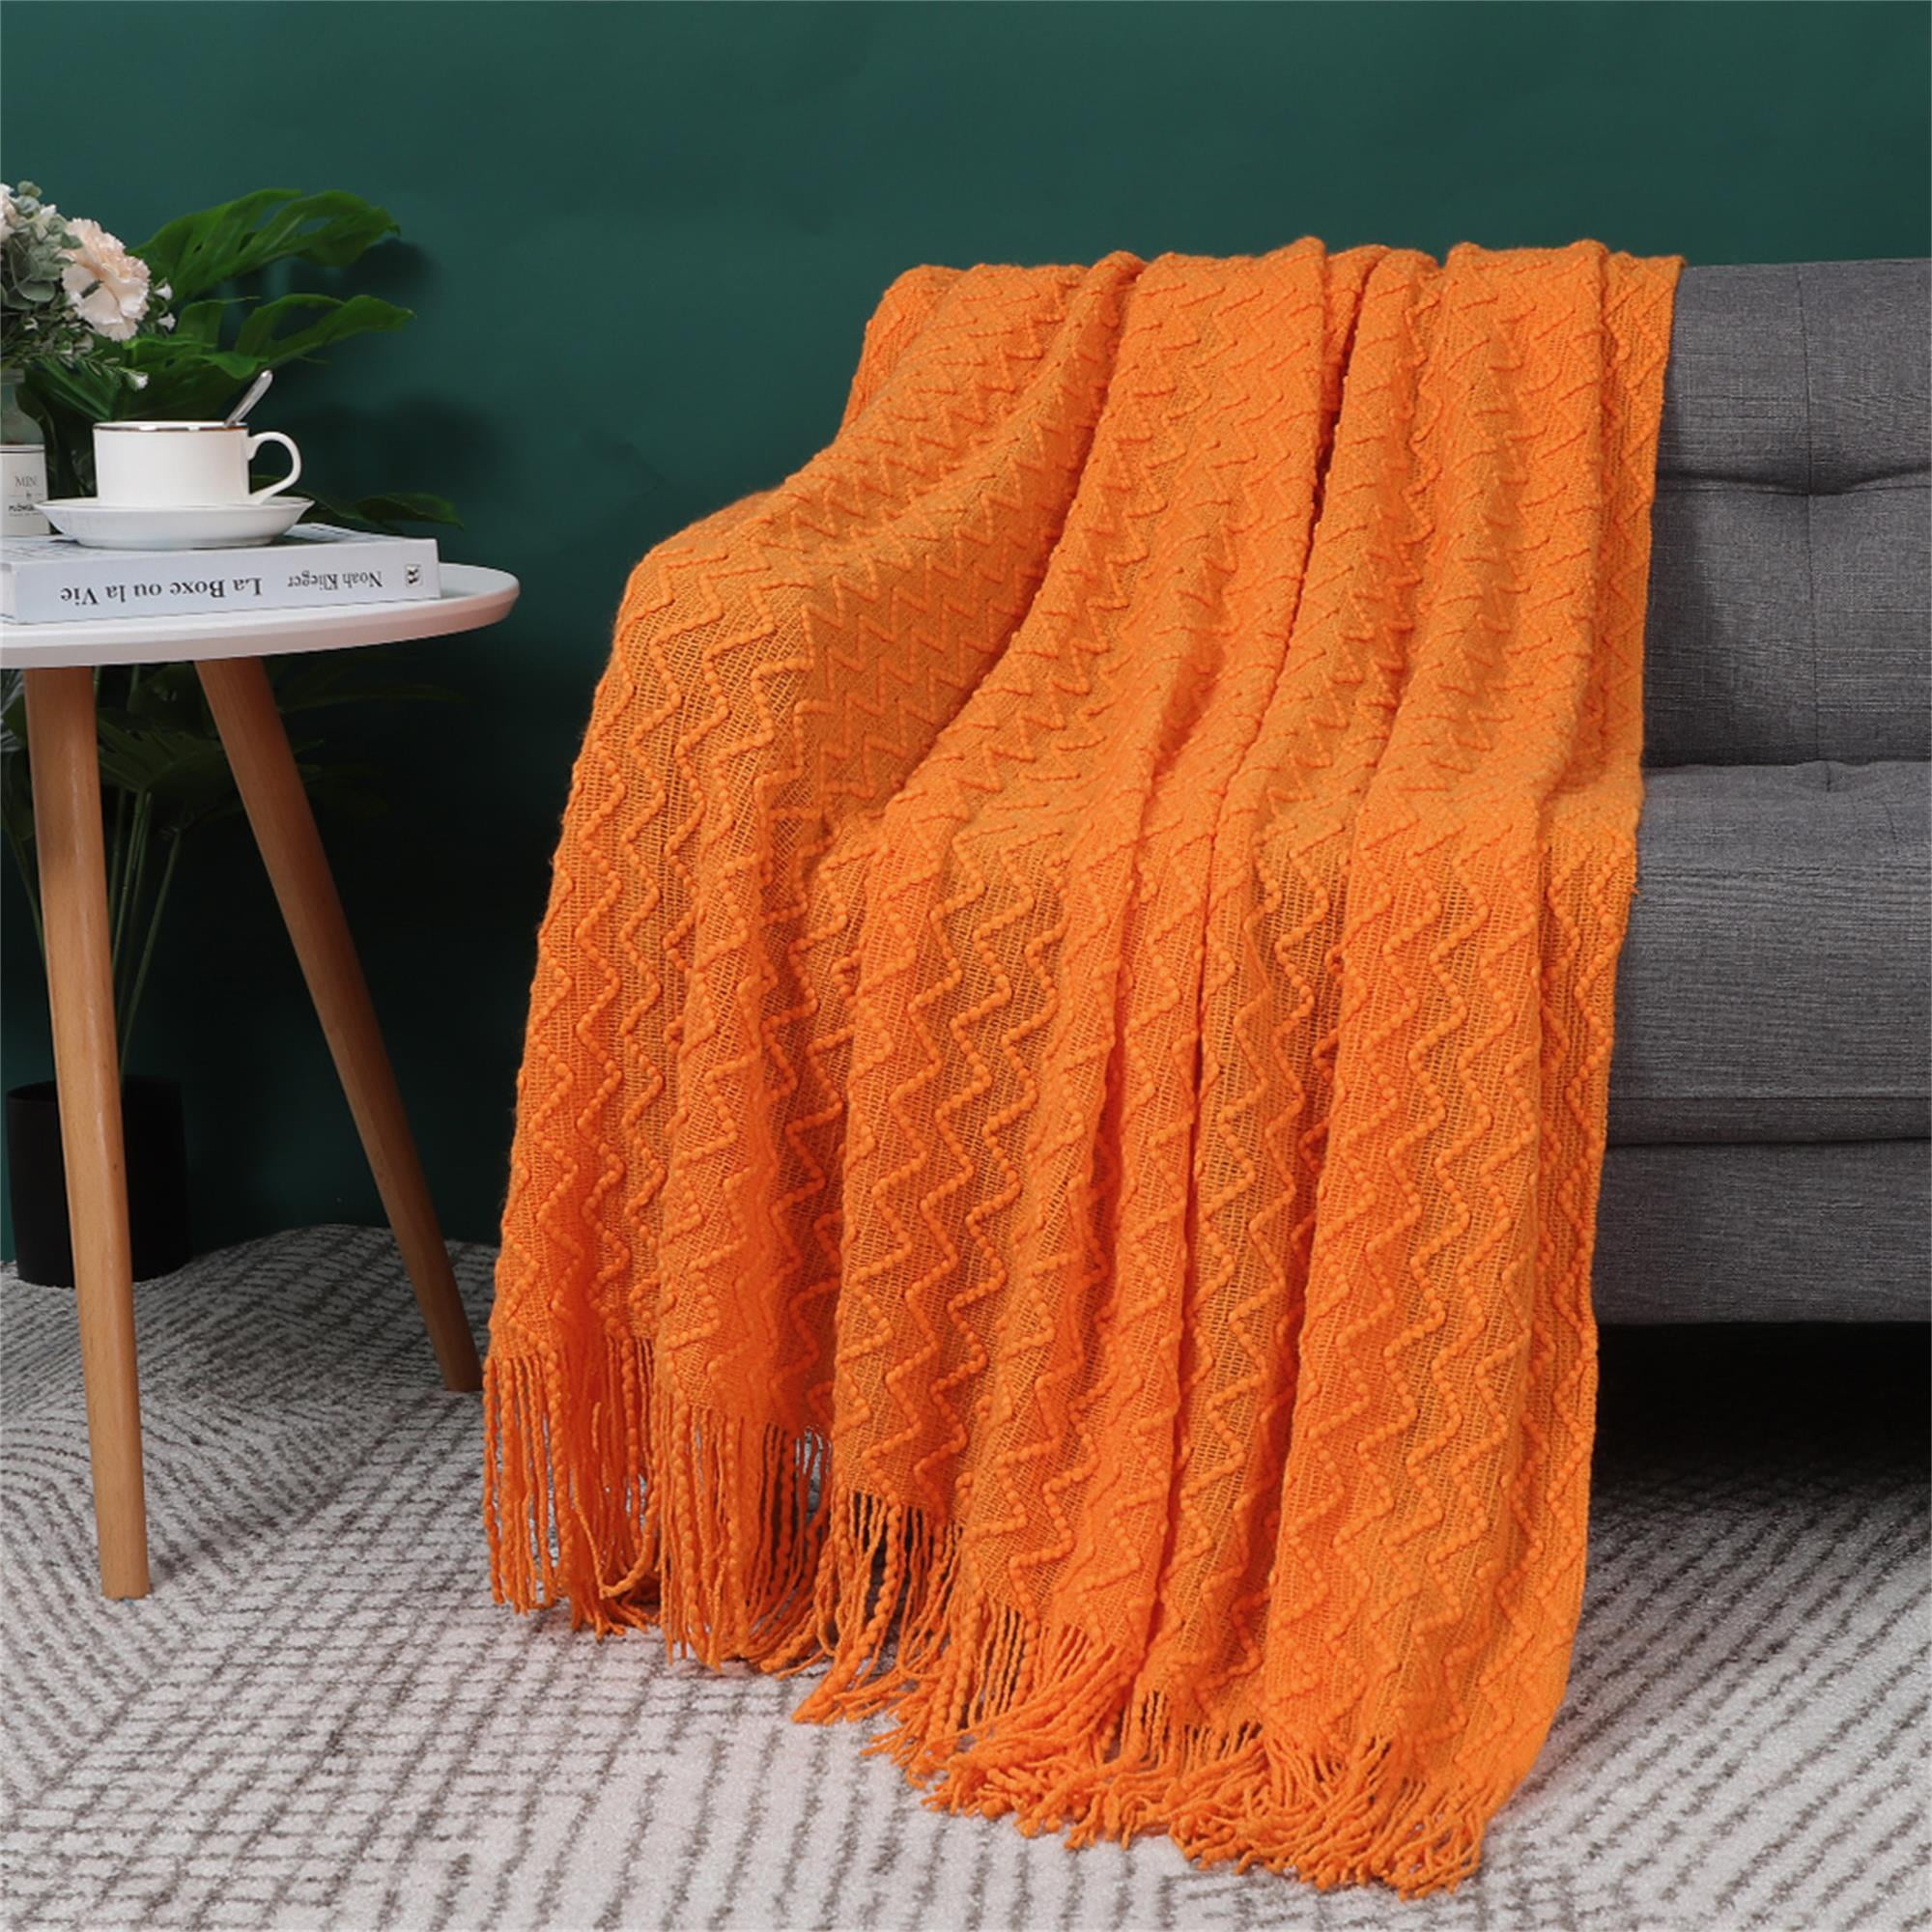 Bed Lightweight Soft Cozy Decorative Woven Blanket with Tassels for Couch Navy Home Travel Chair Suitable for All Seasons PHF Acrylic Knit Throw Blanket 50 x 60 inches Sofa 